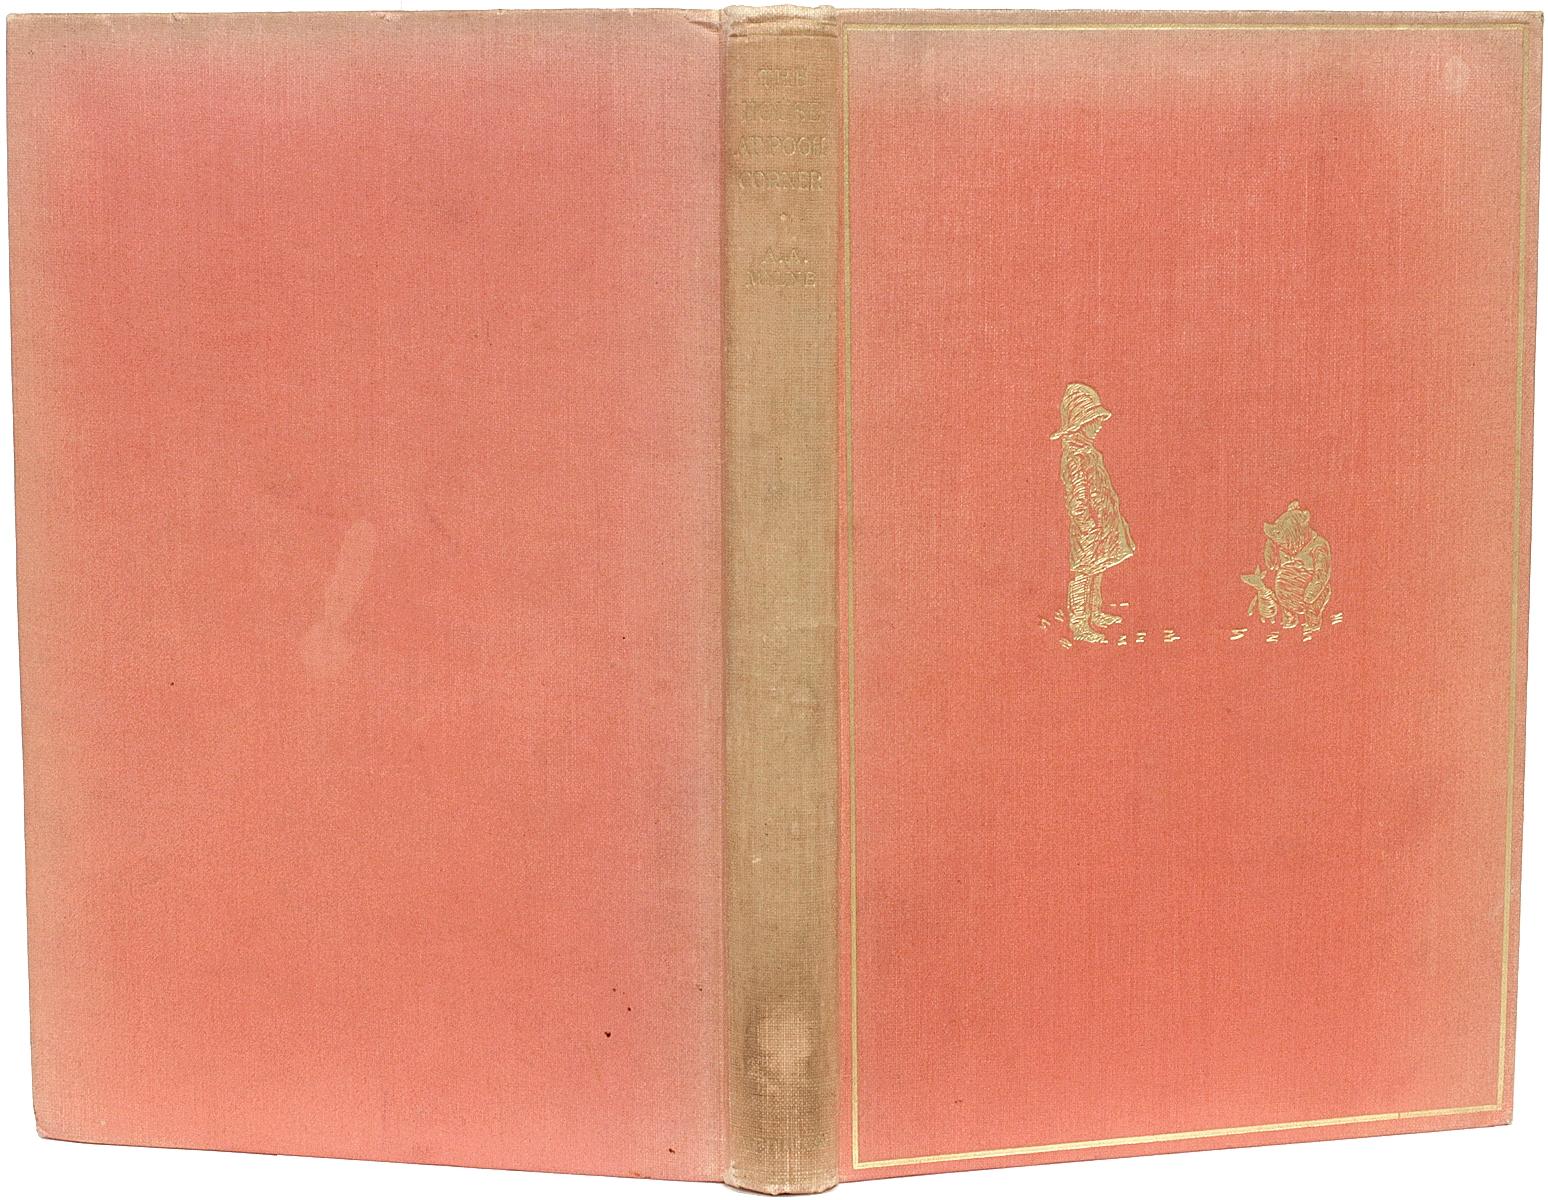 Author: MILNE, A. A. 

Title: The House At Pooh Corner.

Publisher: London: Methuen & Co. Ltd., 1928.

Description: FIRST EDITION. 1 volume, illustrated by E. H. Shephard. Bound in the publisher's original gilt stamped pink cloth, top edge